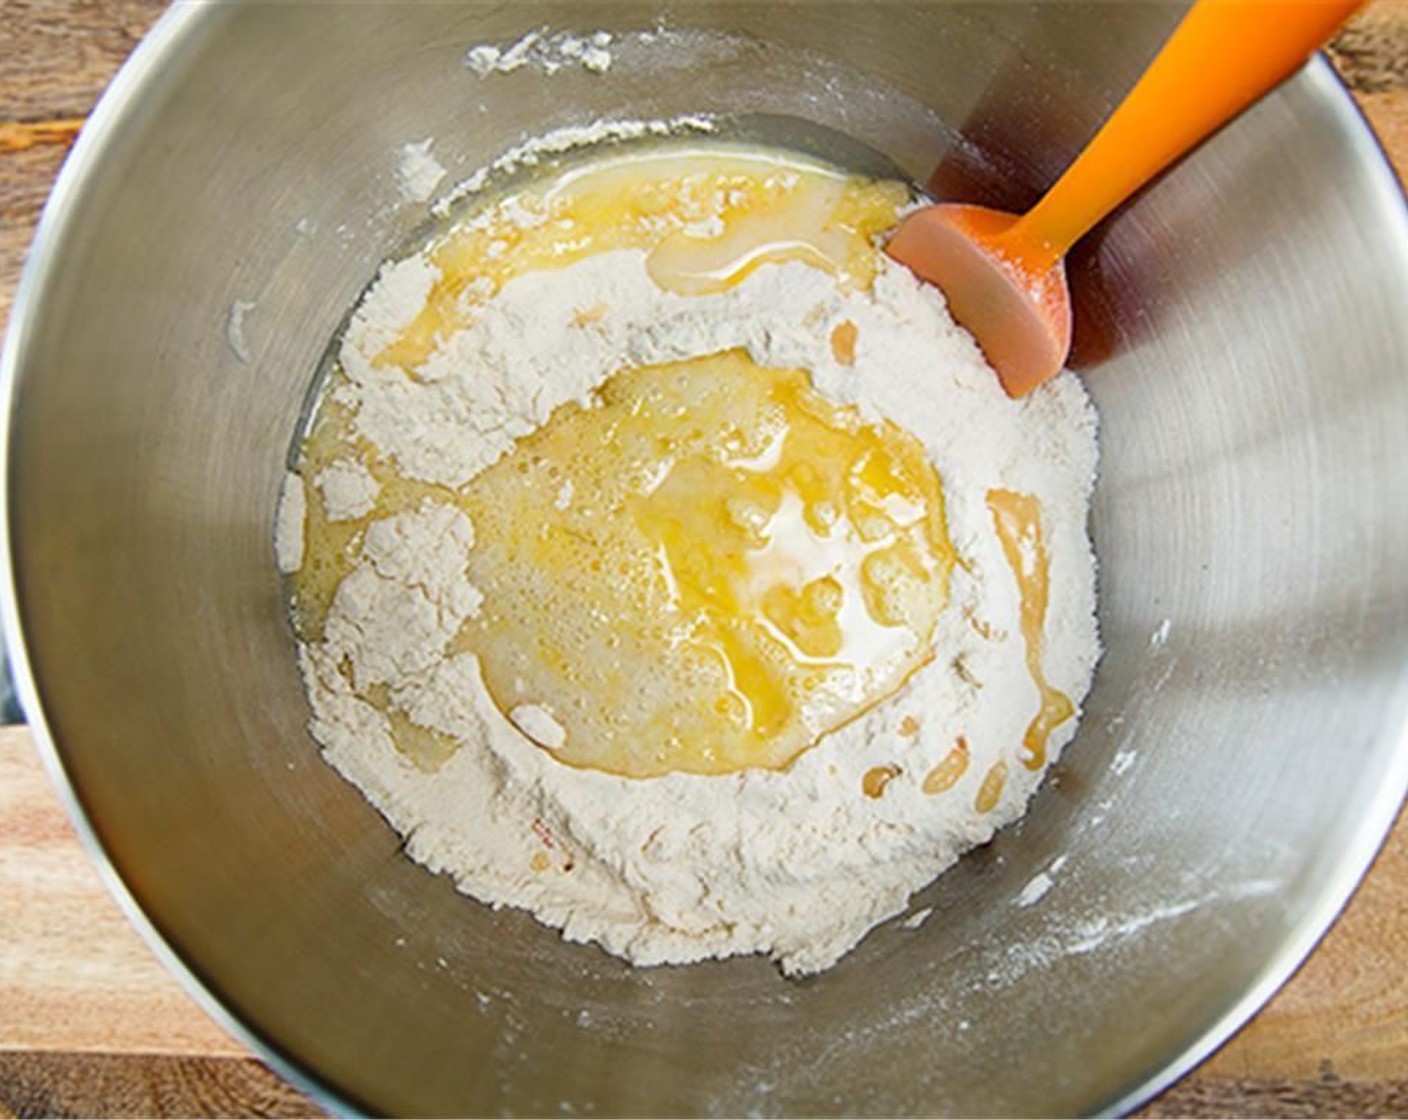 step 4 Make a well in the center of dry ingredients and pour the wet mixture in the well. Stir until thoroughly combined.